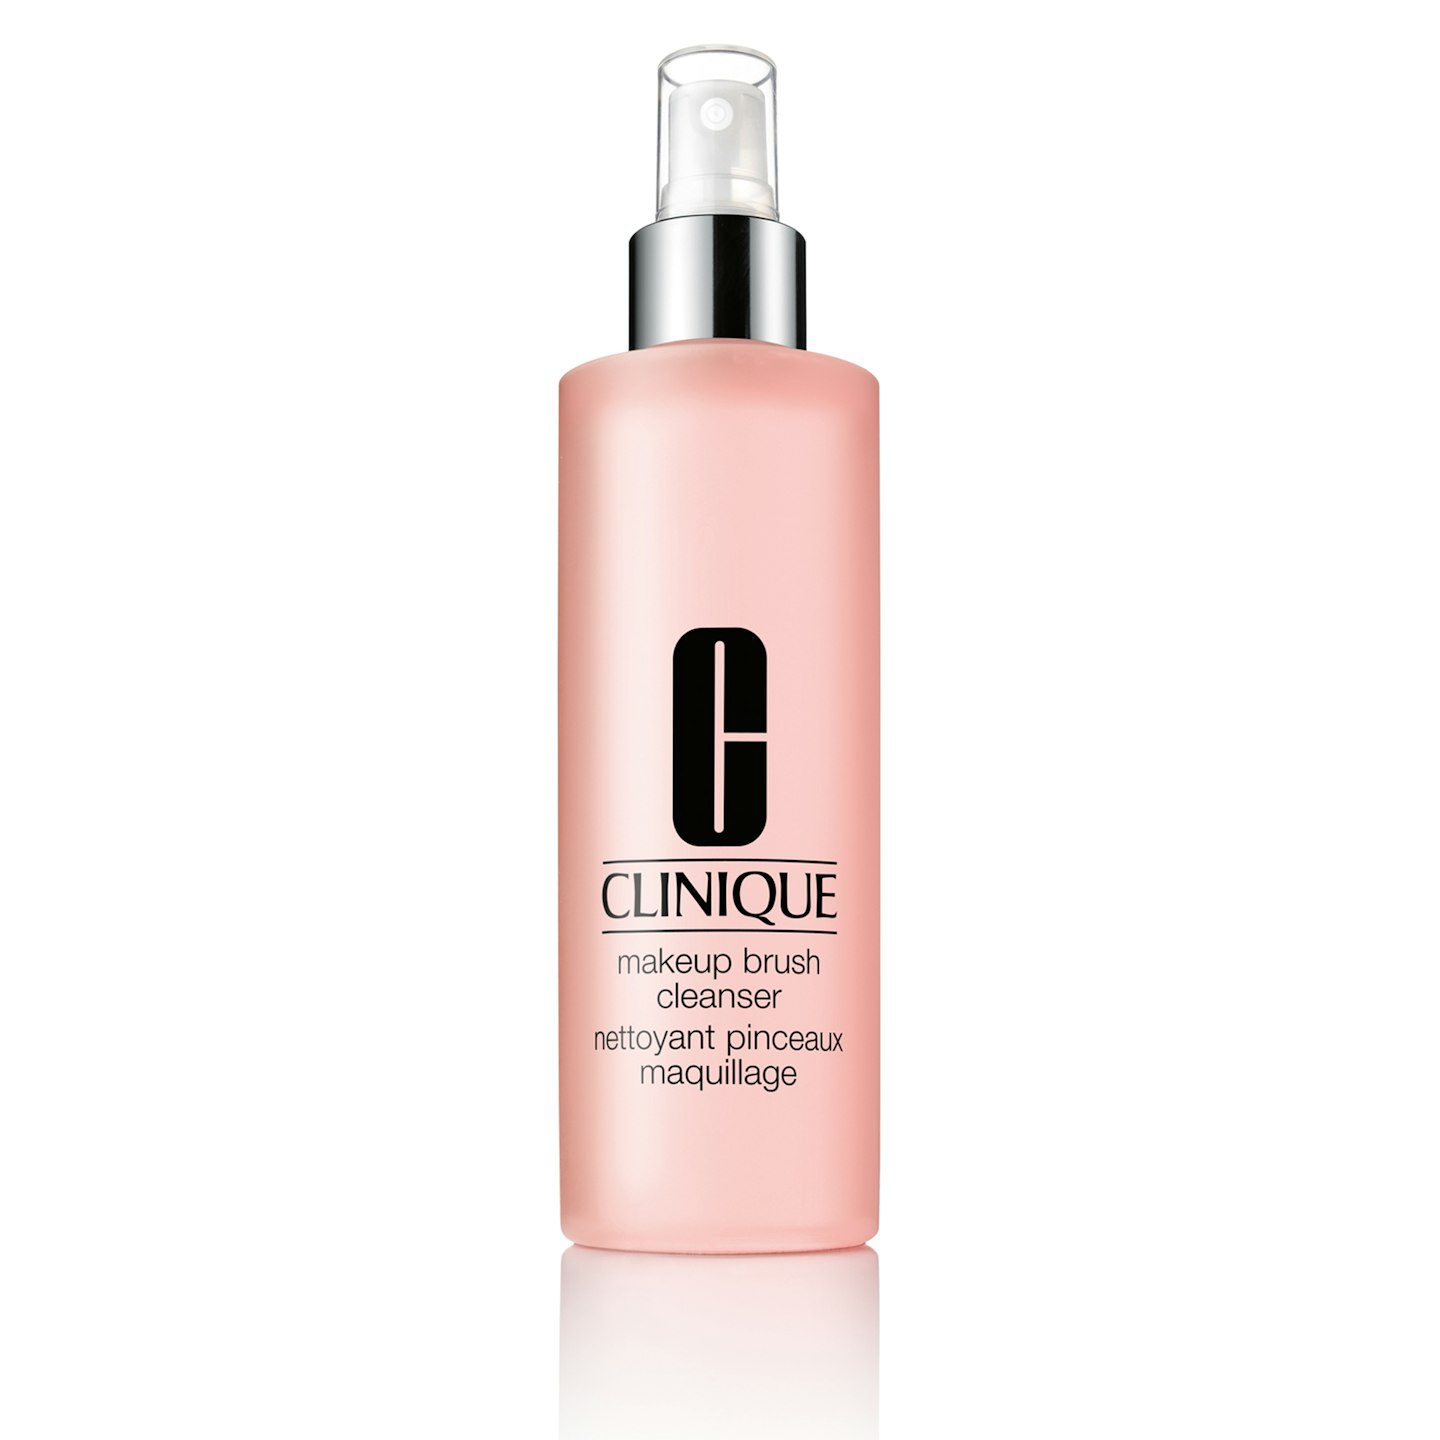 Clinique Make-Up Brush Cleanser, £14